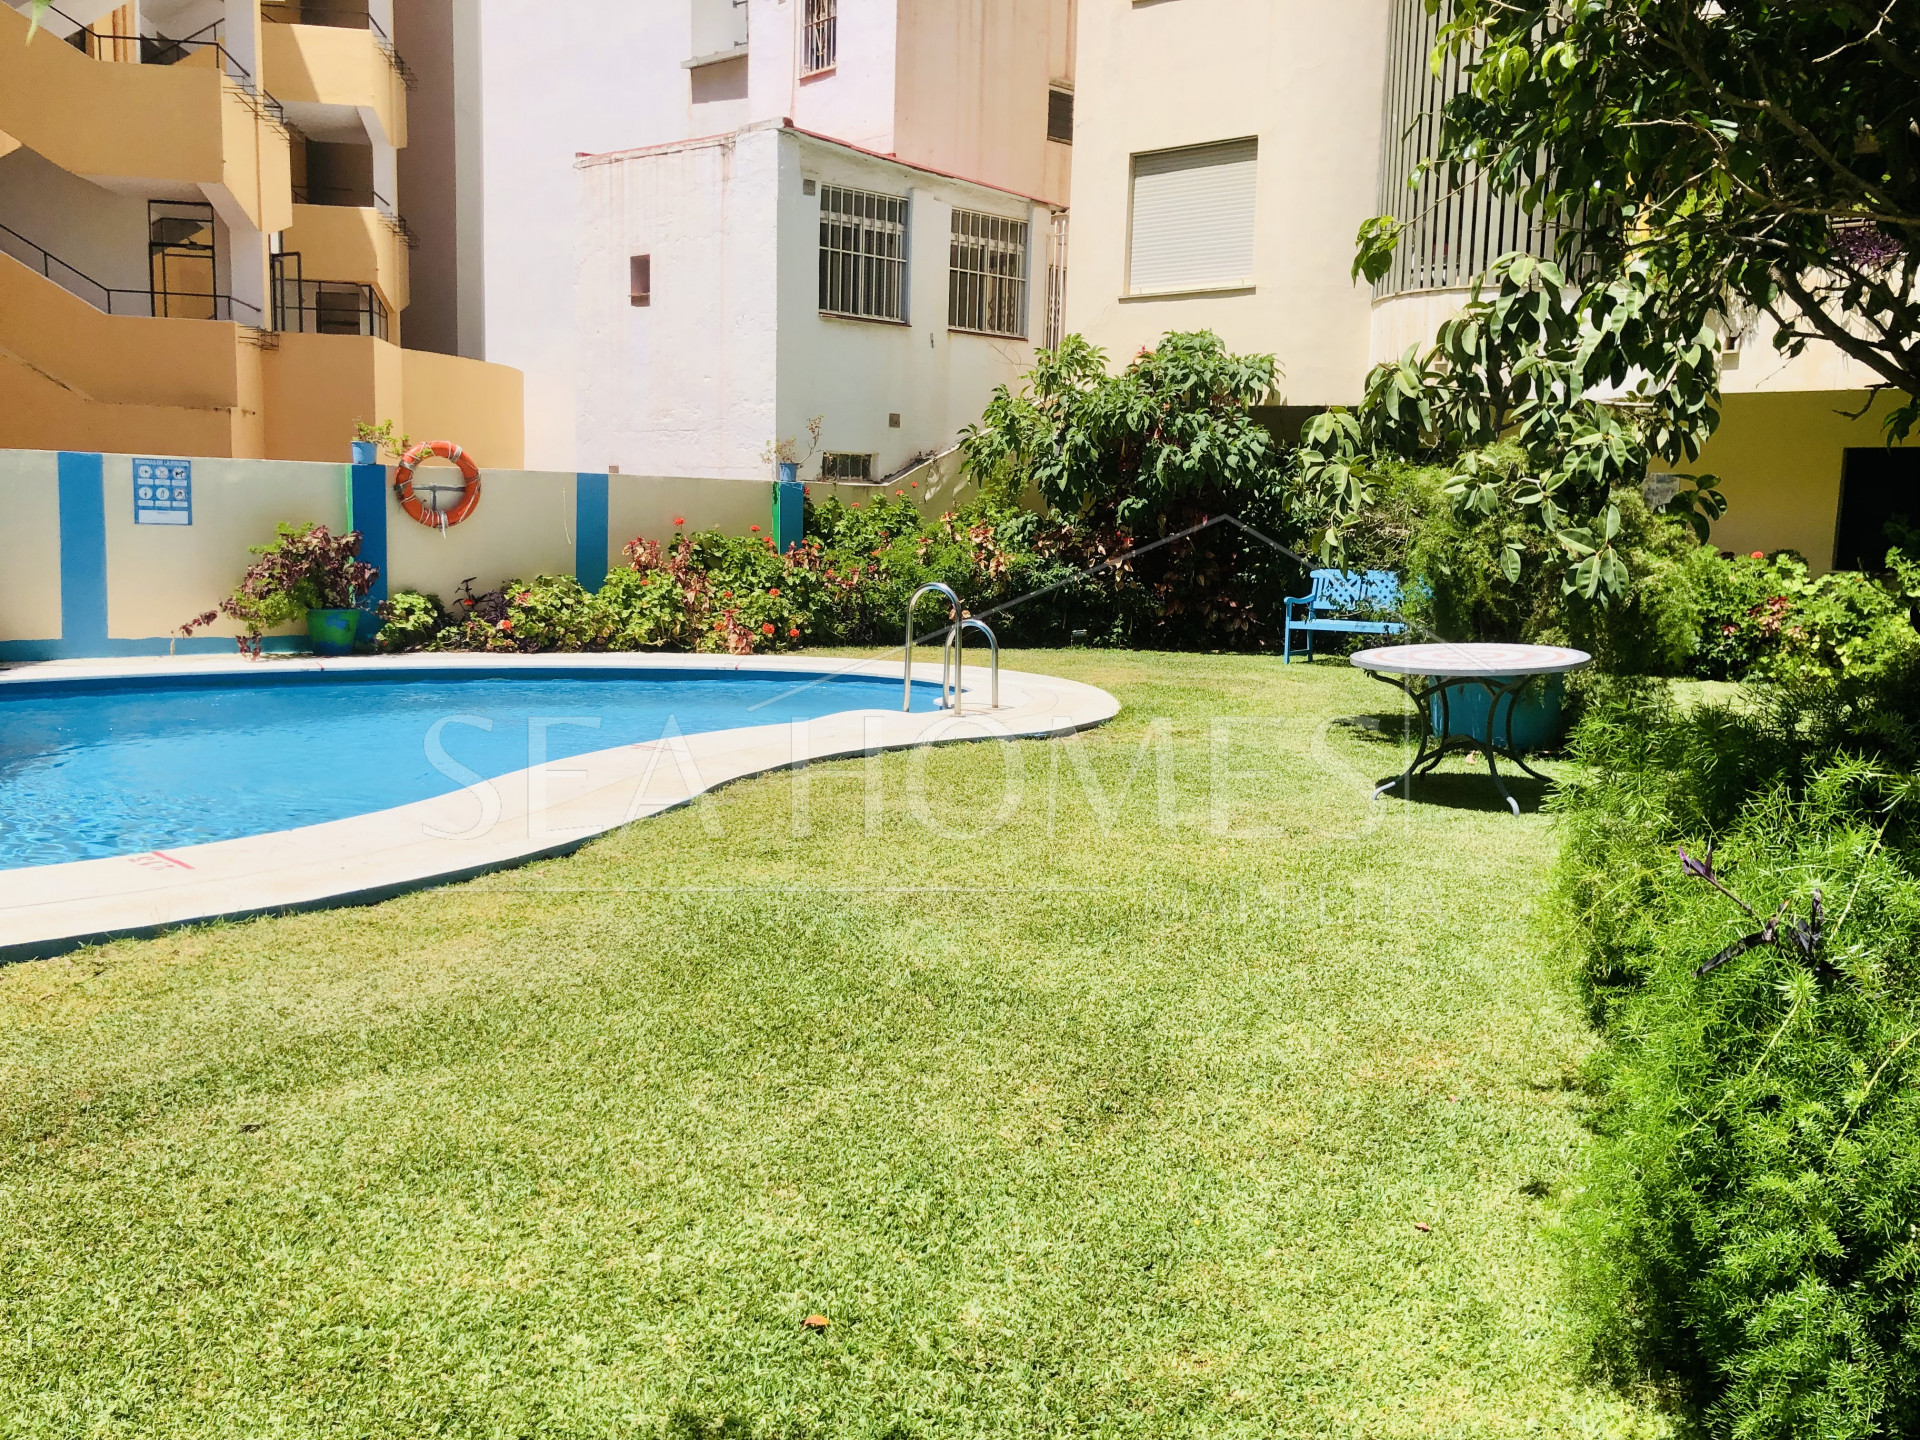 Superb two-bedroom apartment in Marbella center, a cross the street from the old town, with a pool and a few meters from the beach.